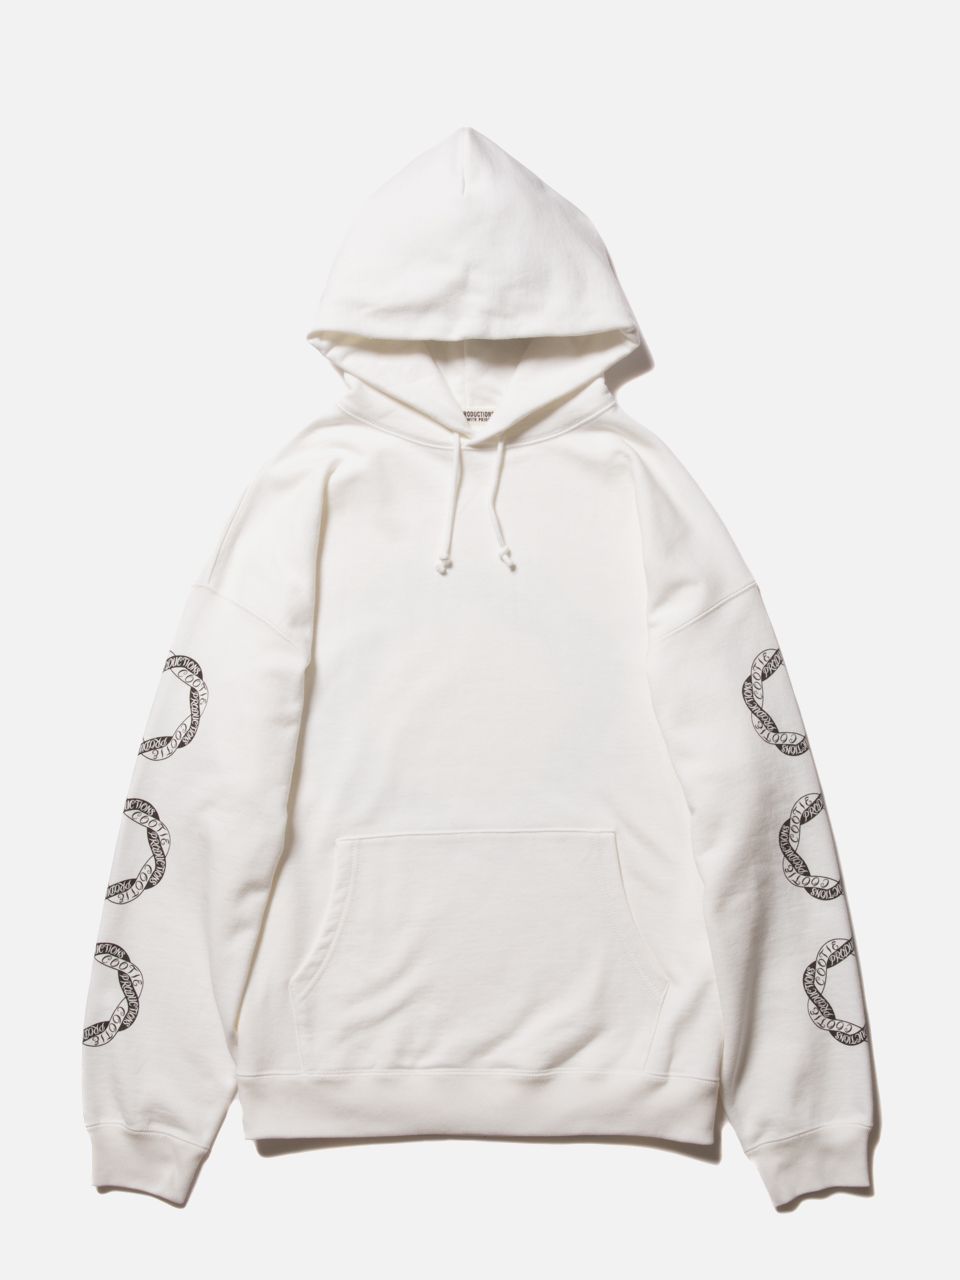 COOTIE クーティ 通販 パーカー Print Pullover Parka-3 -White-